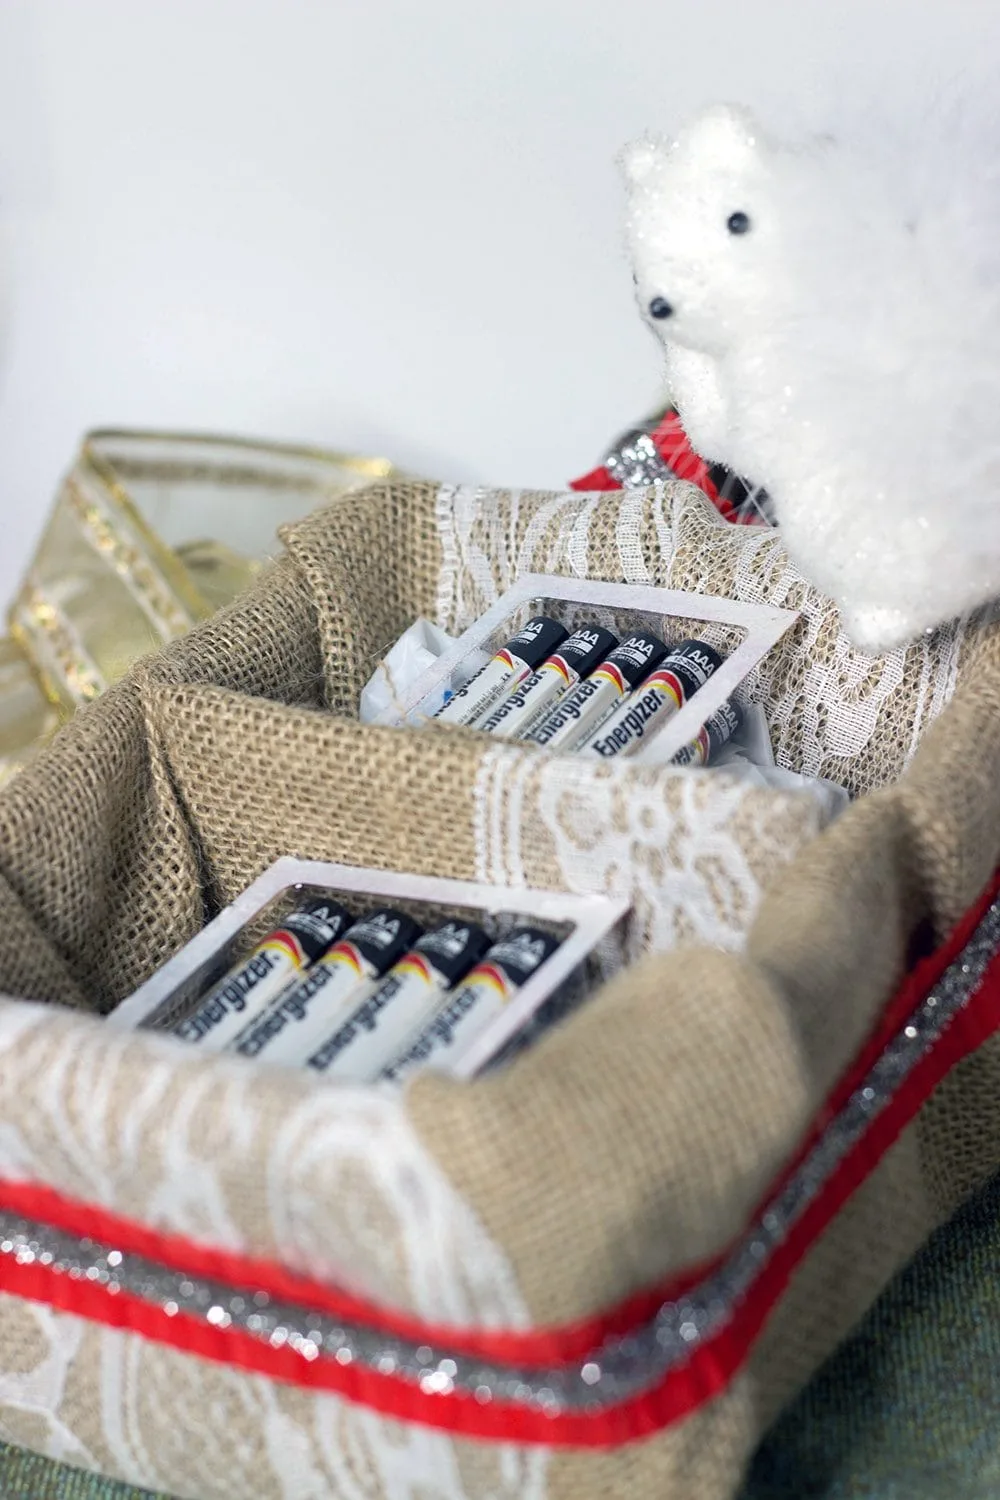 Batteries in a decorated basket with holiday decor. 